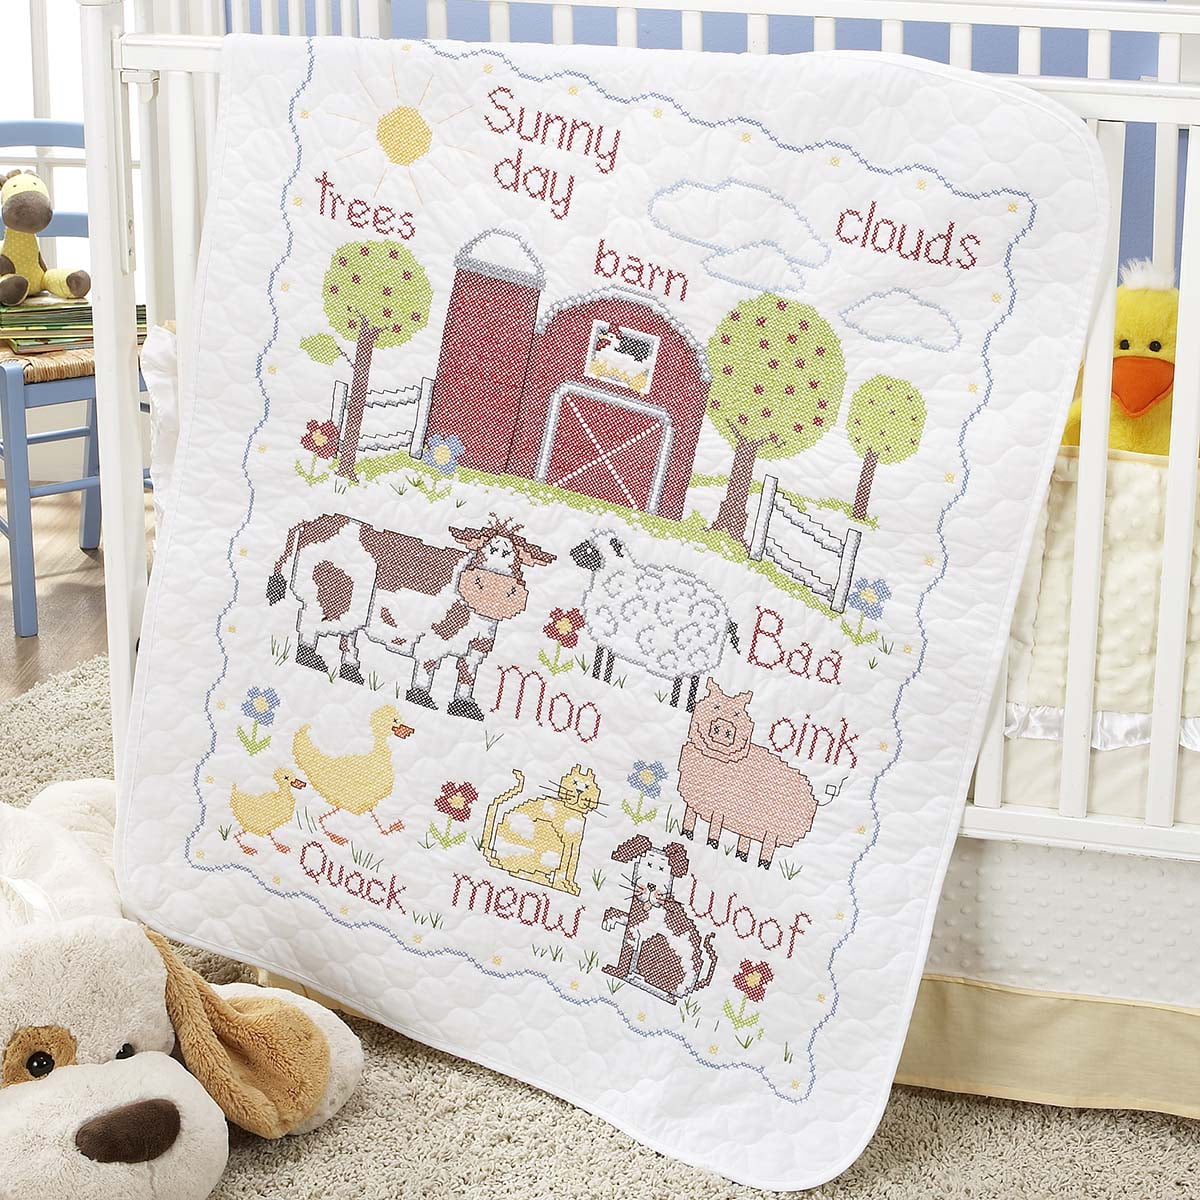 Weekend Kits Blog: Cross Stitch Kits For Baby On The Farm